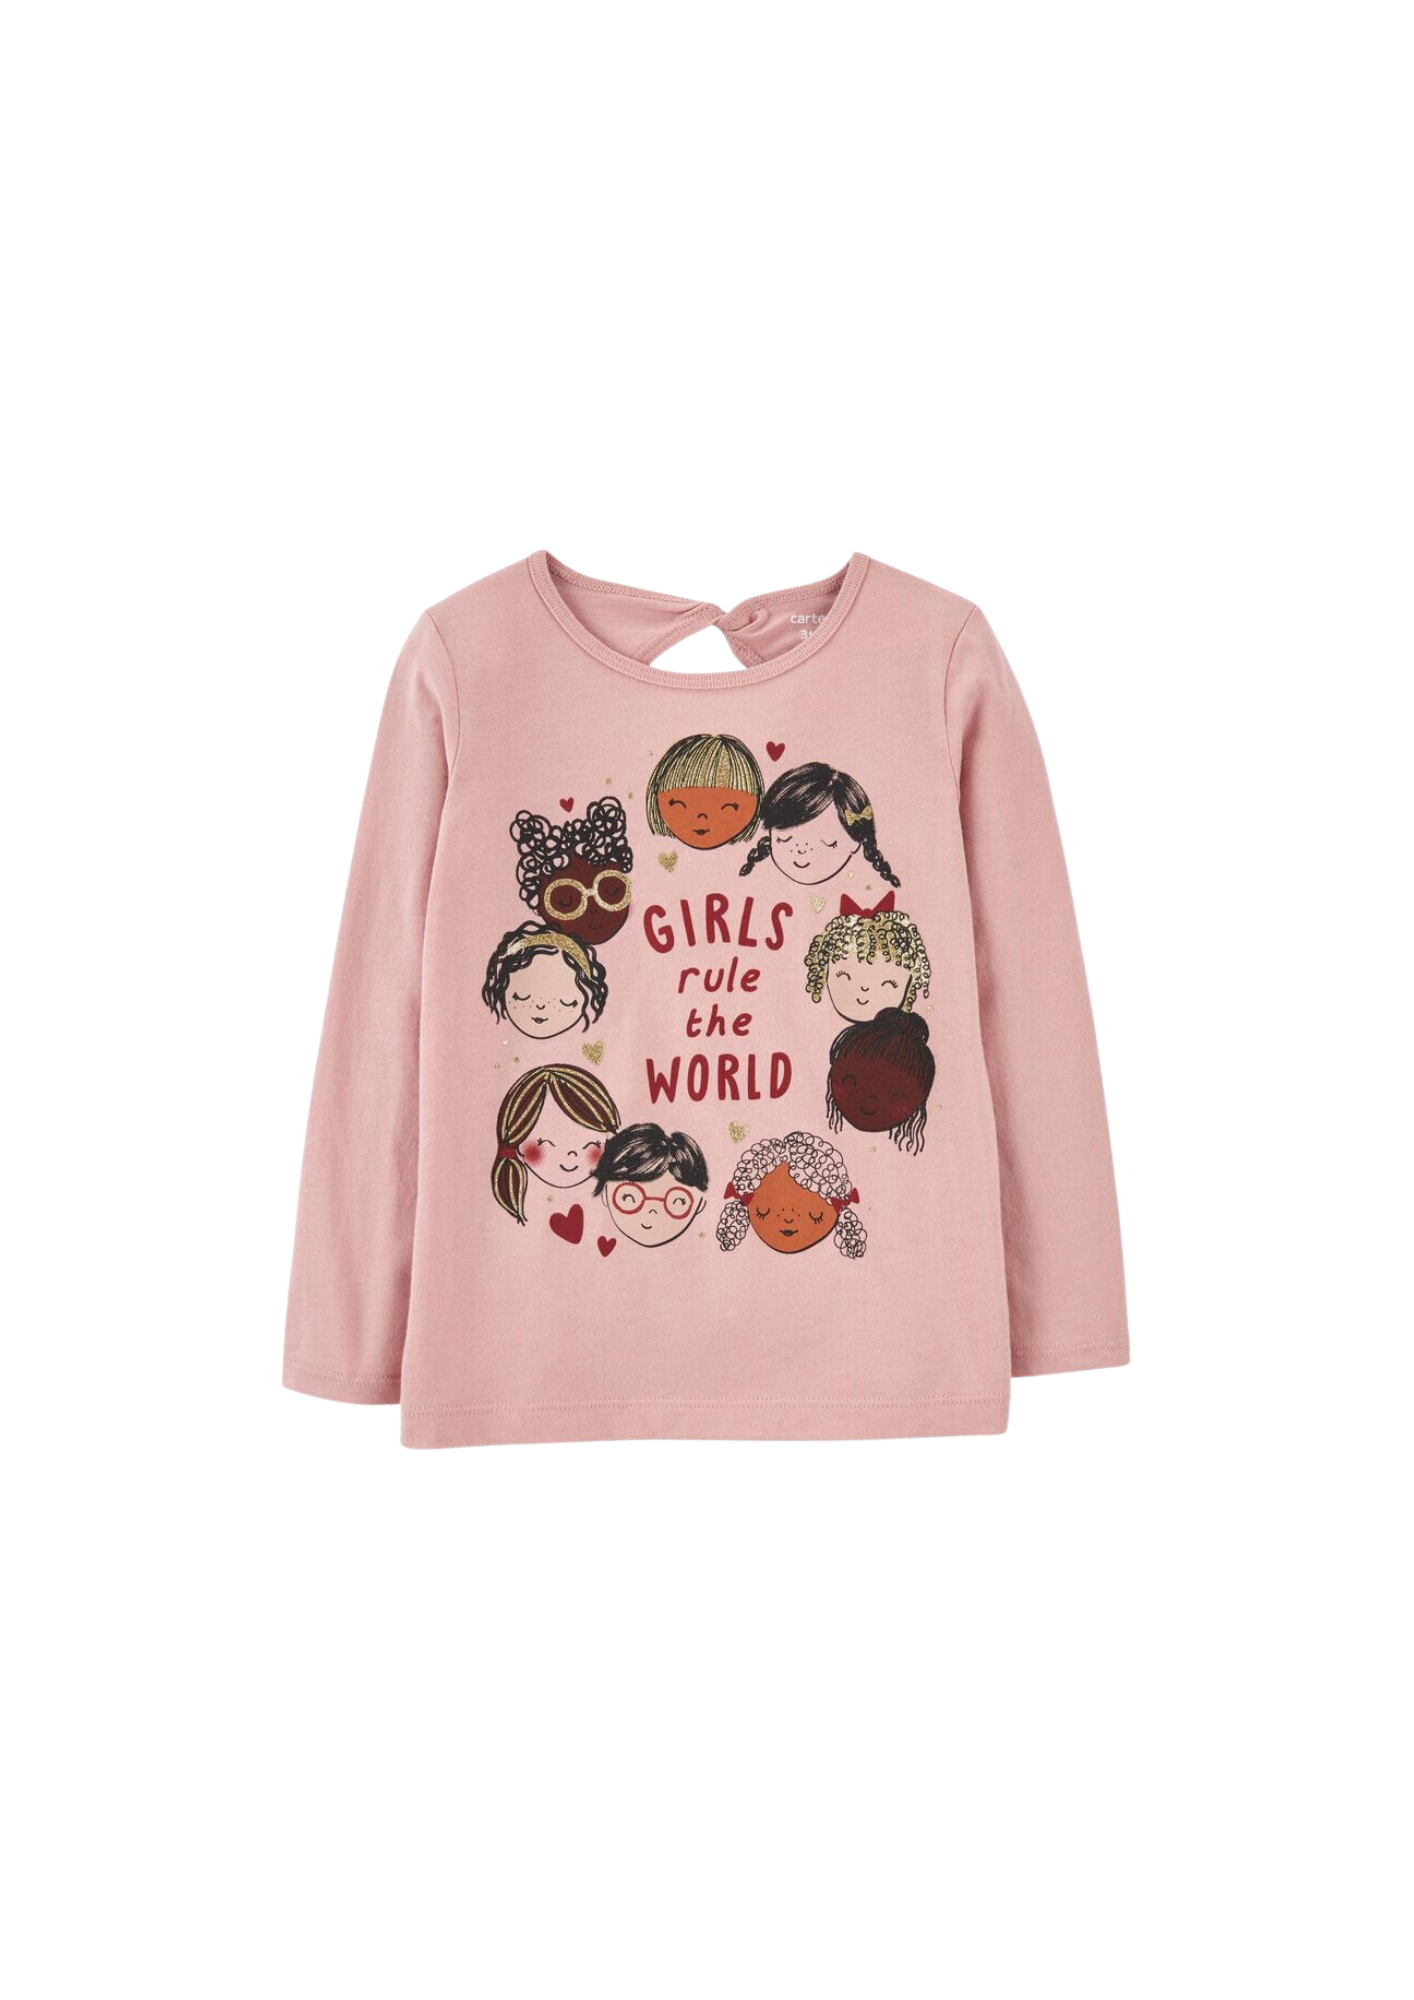 Carter's - Blusa con mangas largas "Girls rule the world"